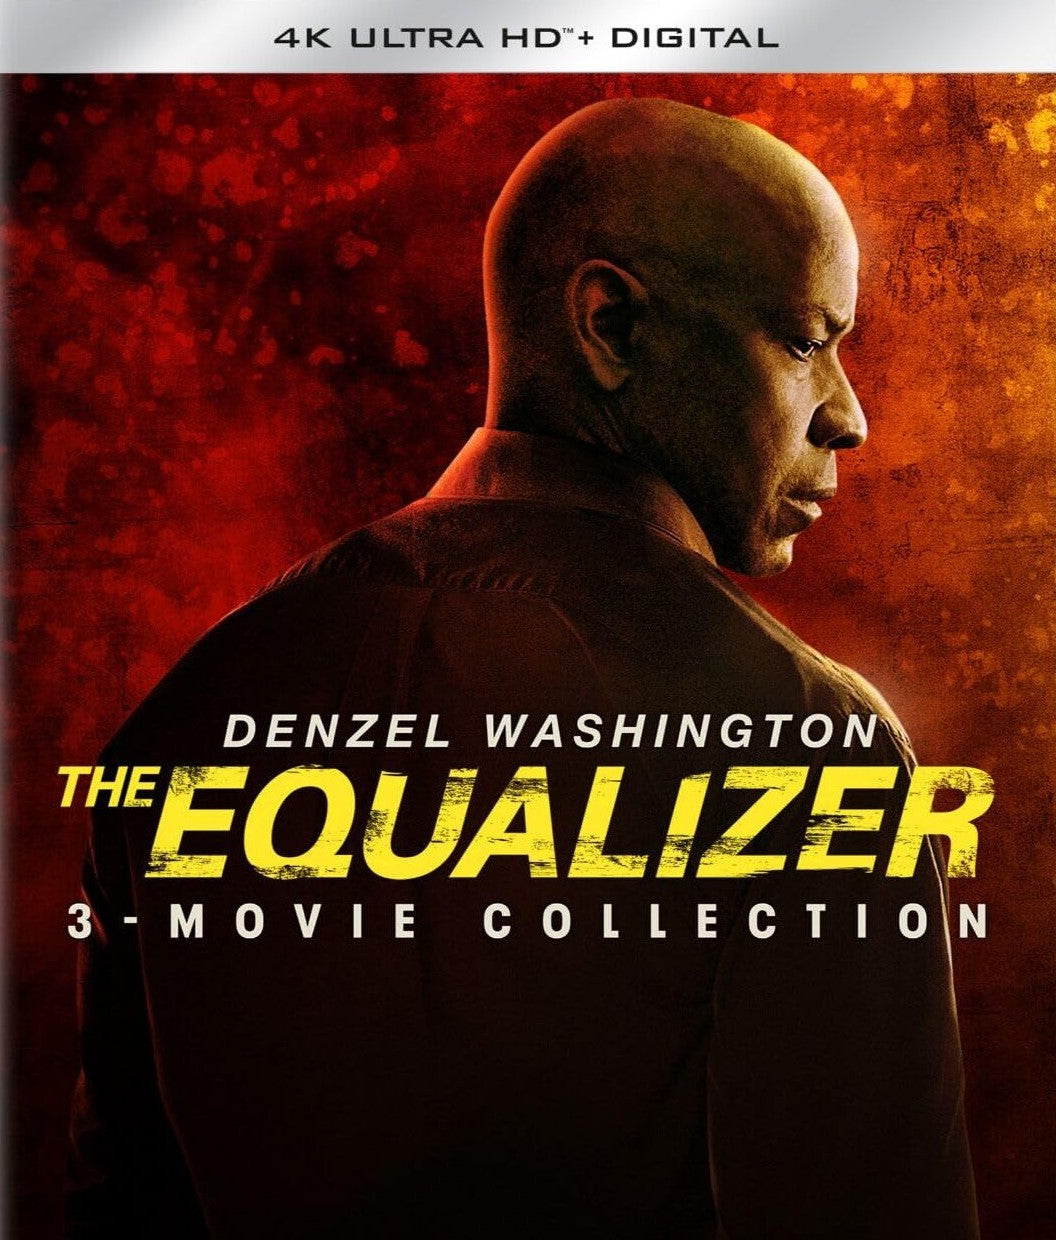 THE EQUALIZER 3-MOVIE COLLECTION 4K UHD